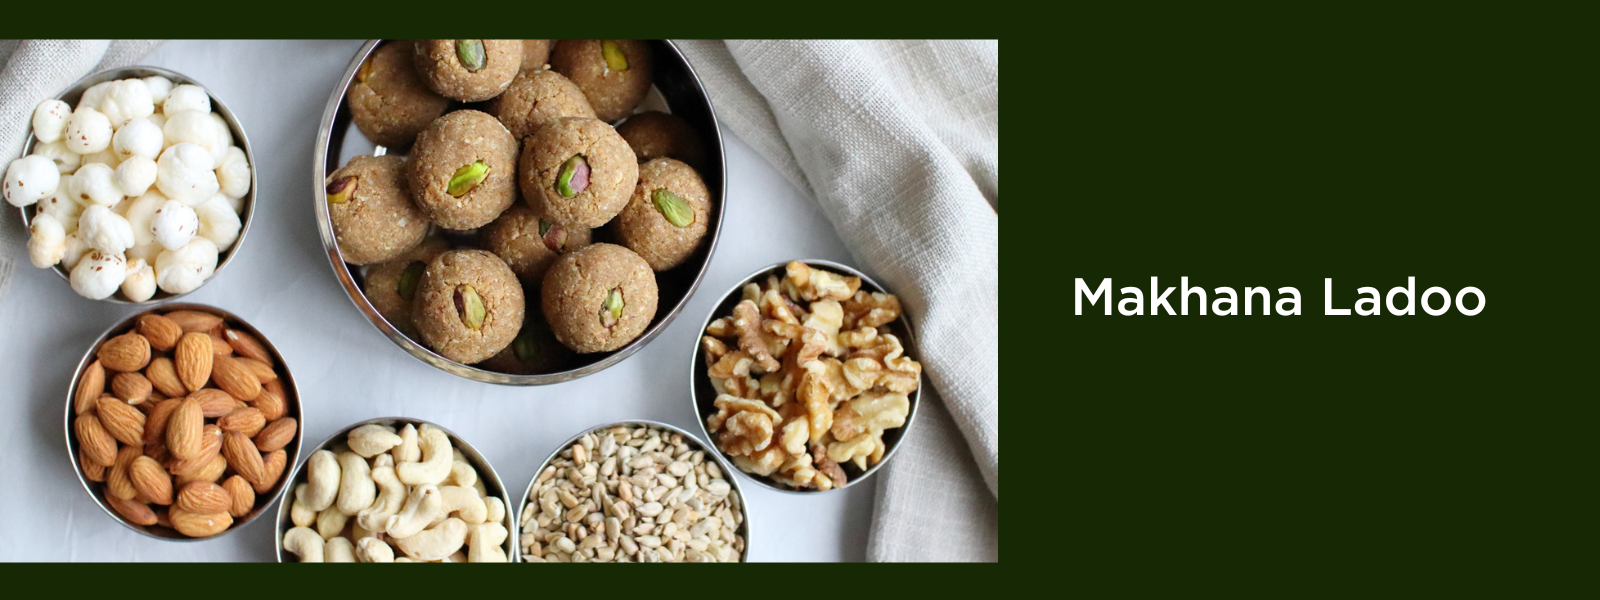 Makhana Ladoo with Gond Katira is surely a must try during Navratri